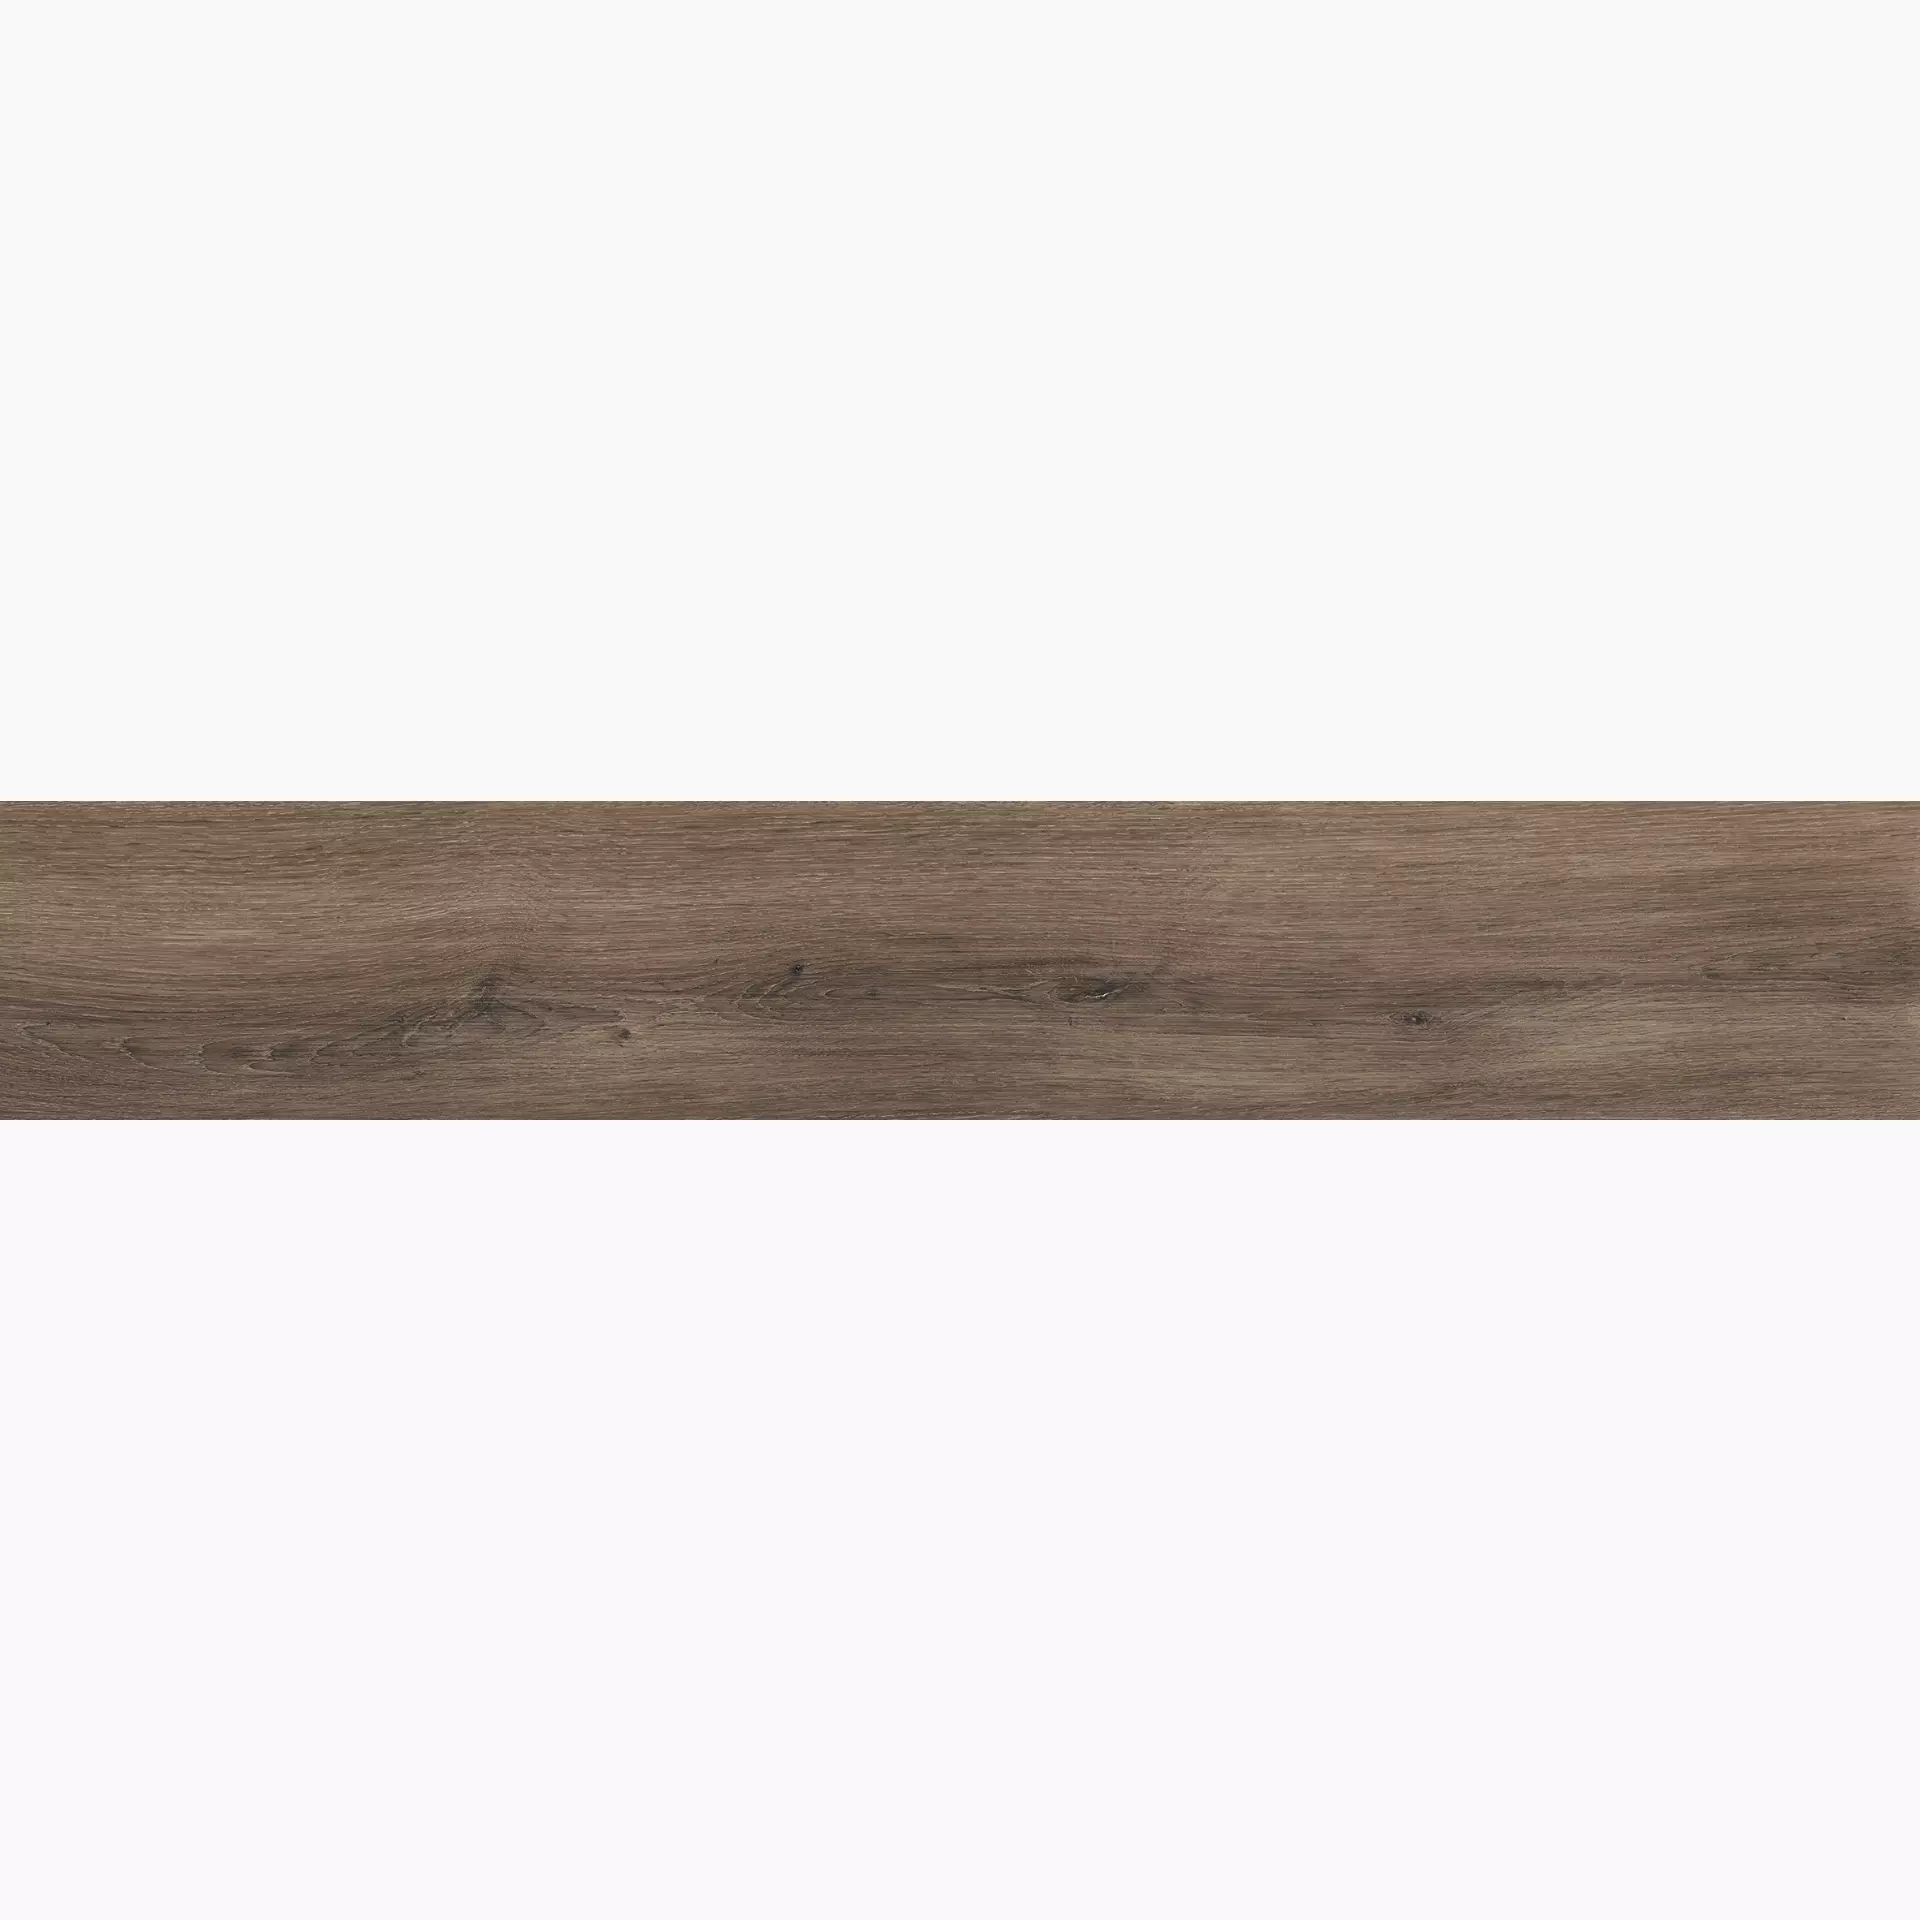 ABK Eco-Chic Brown Naturale PF60004941 20x120cm rectified 8,5mm